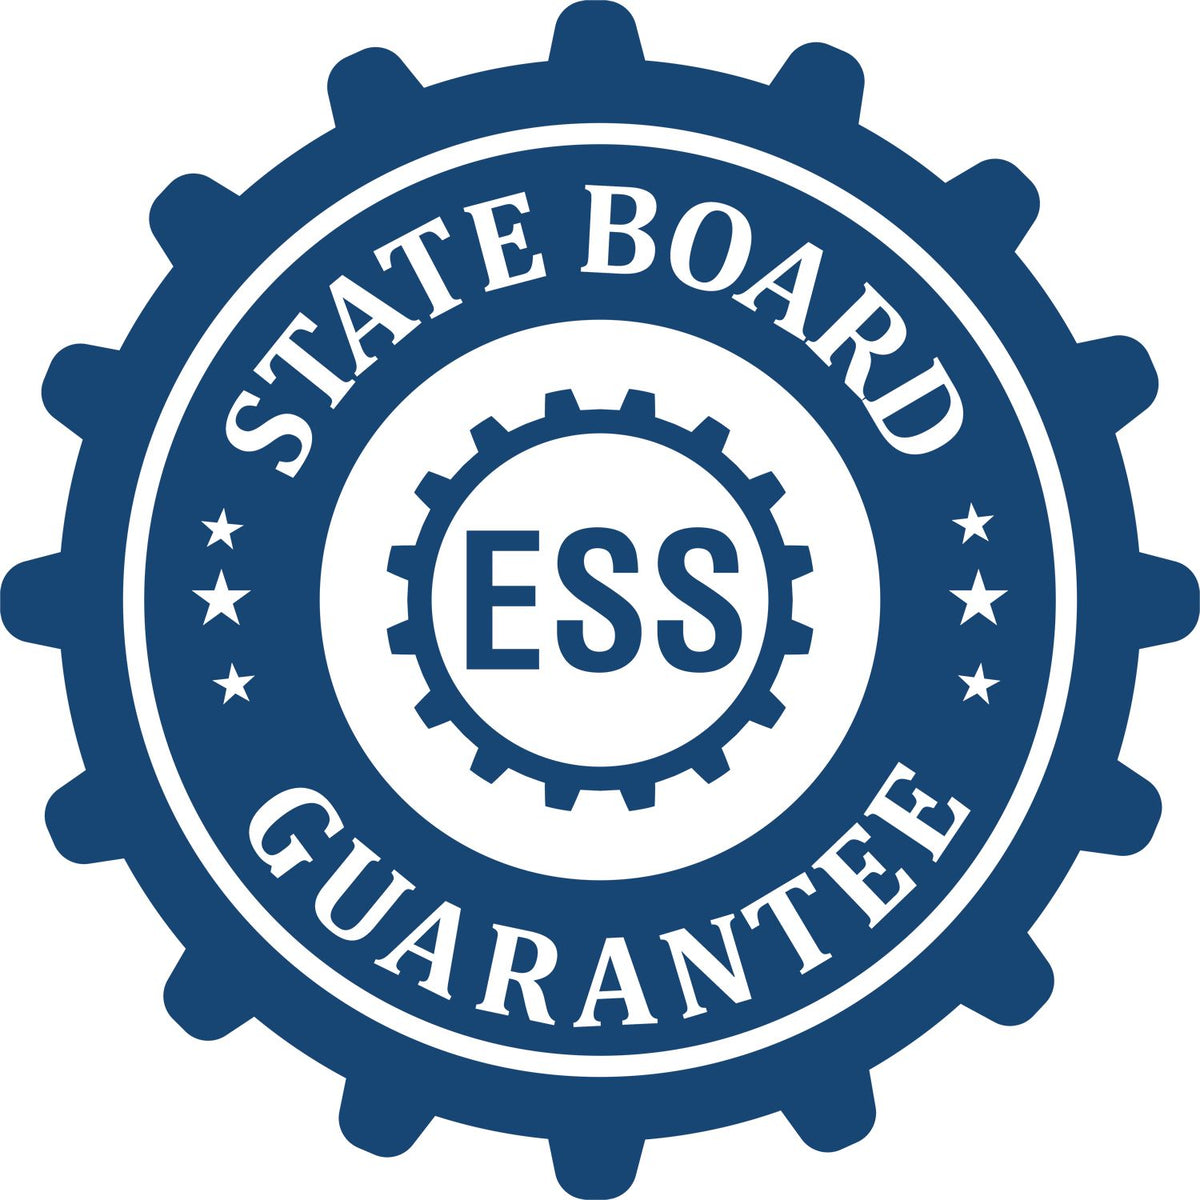 An emblem in a gear shape illustrating a state board guarantee for the Hybrid Vermont Architect Seal